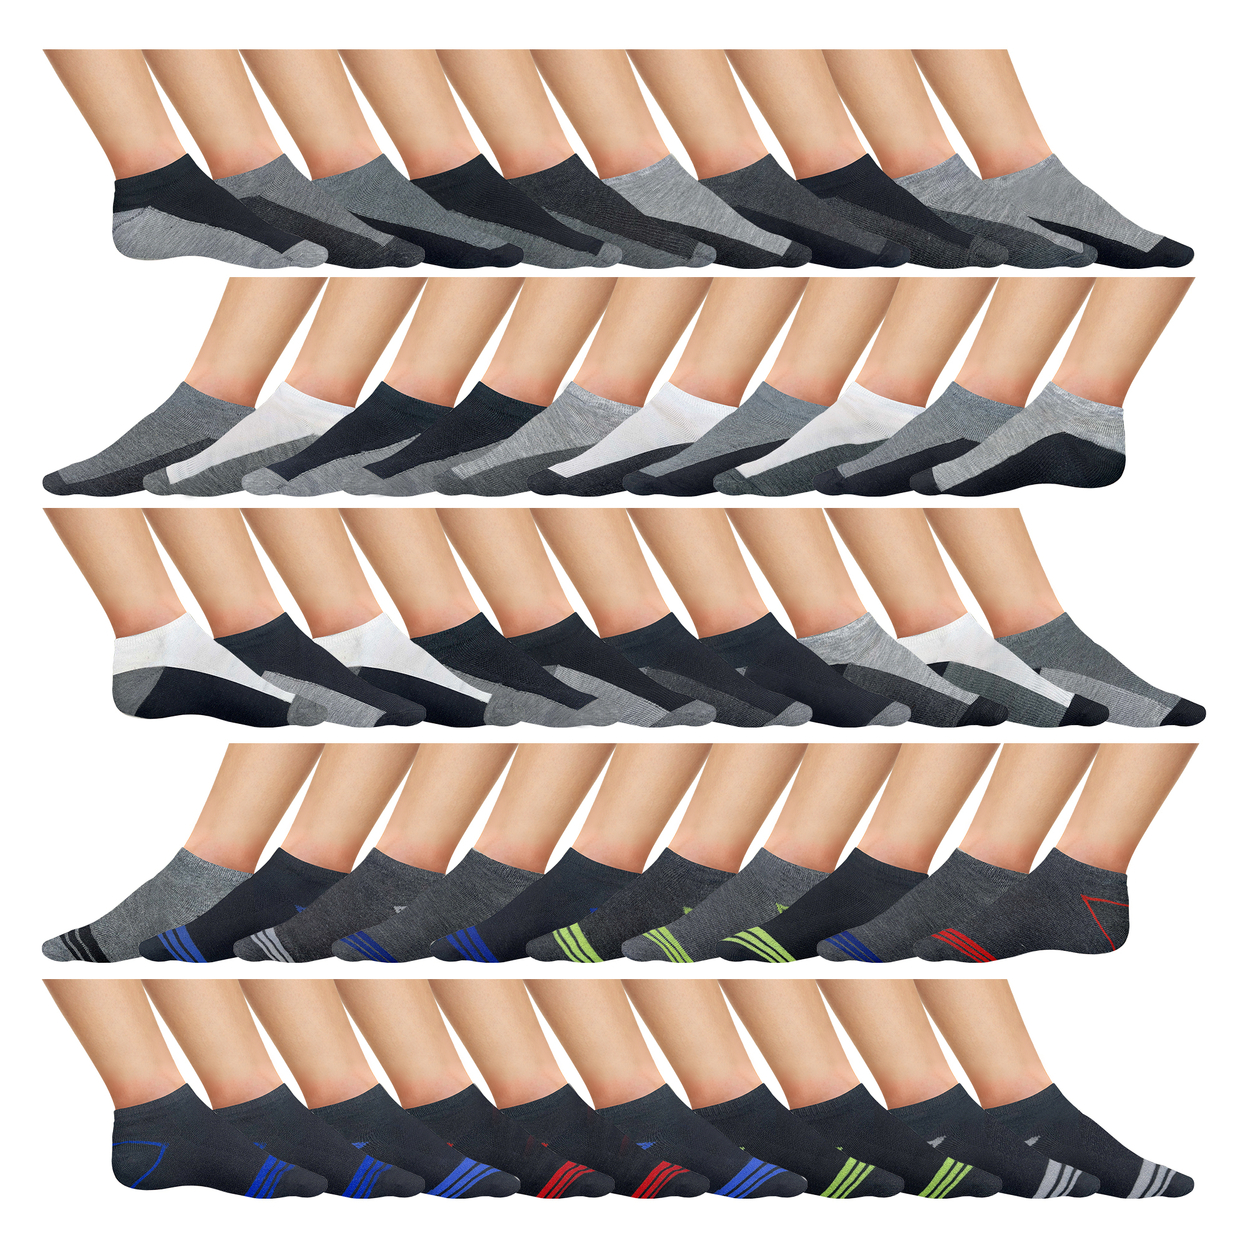 30-Pairs: Men's Moisture Wicking Performance Mesh Running Active Low-Cut Athletic Ankle Socks